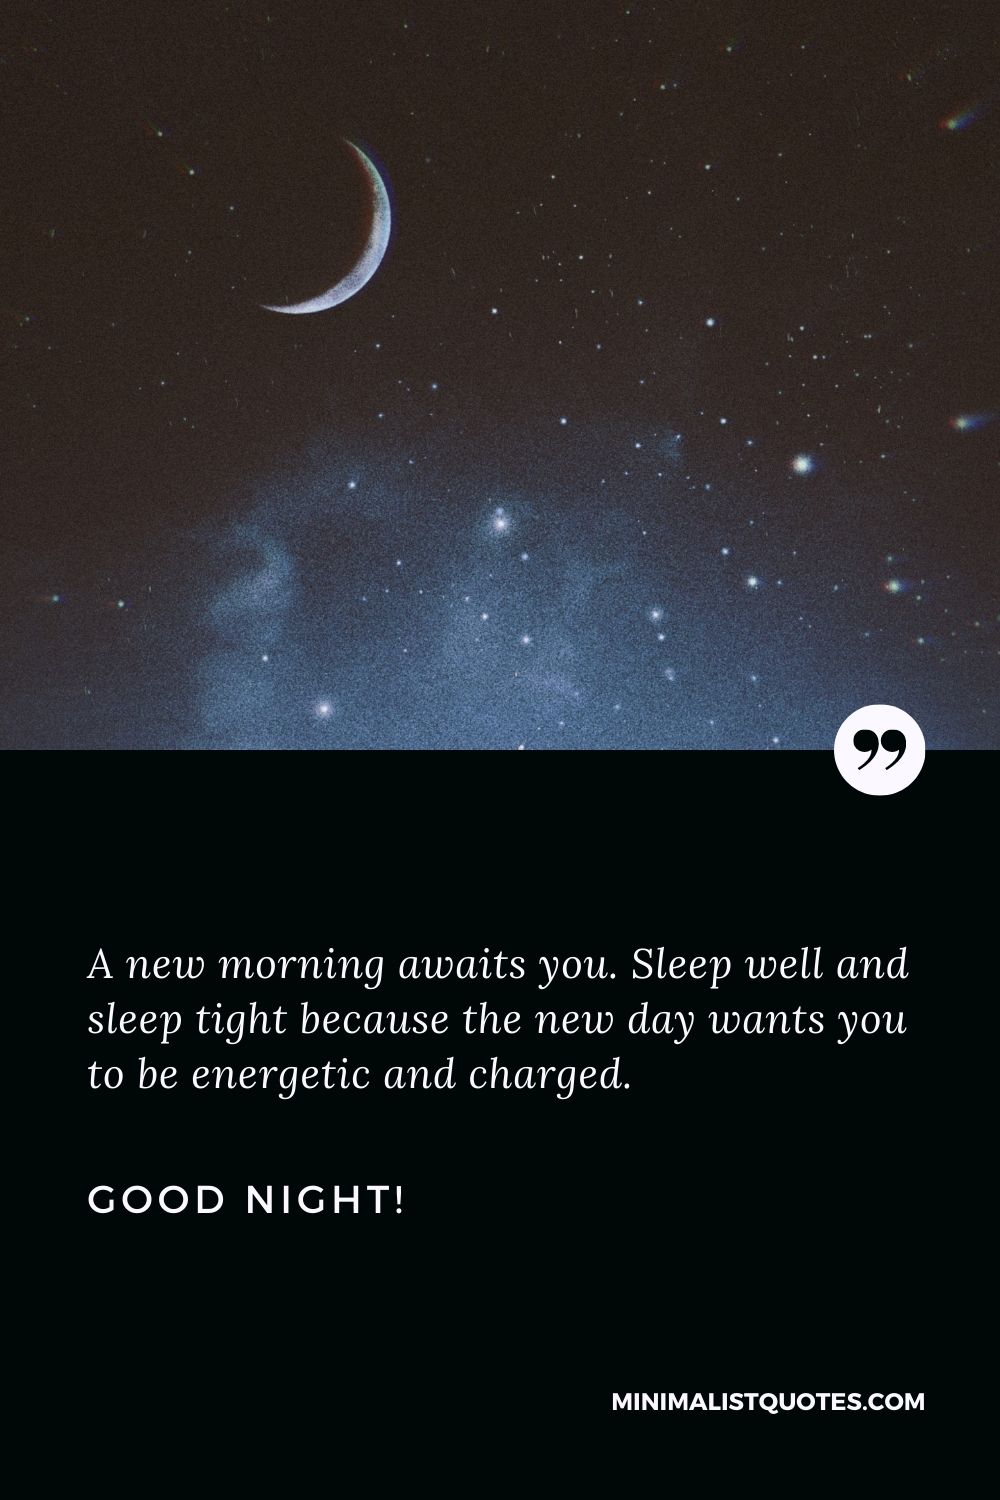 Good night wishes in English: A new morning awaits you. Sleep well and sleep tight because the new day wants you to be energetic and charged. Good Night!